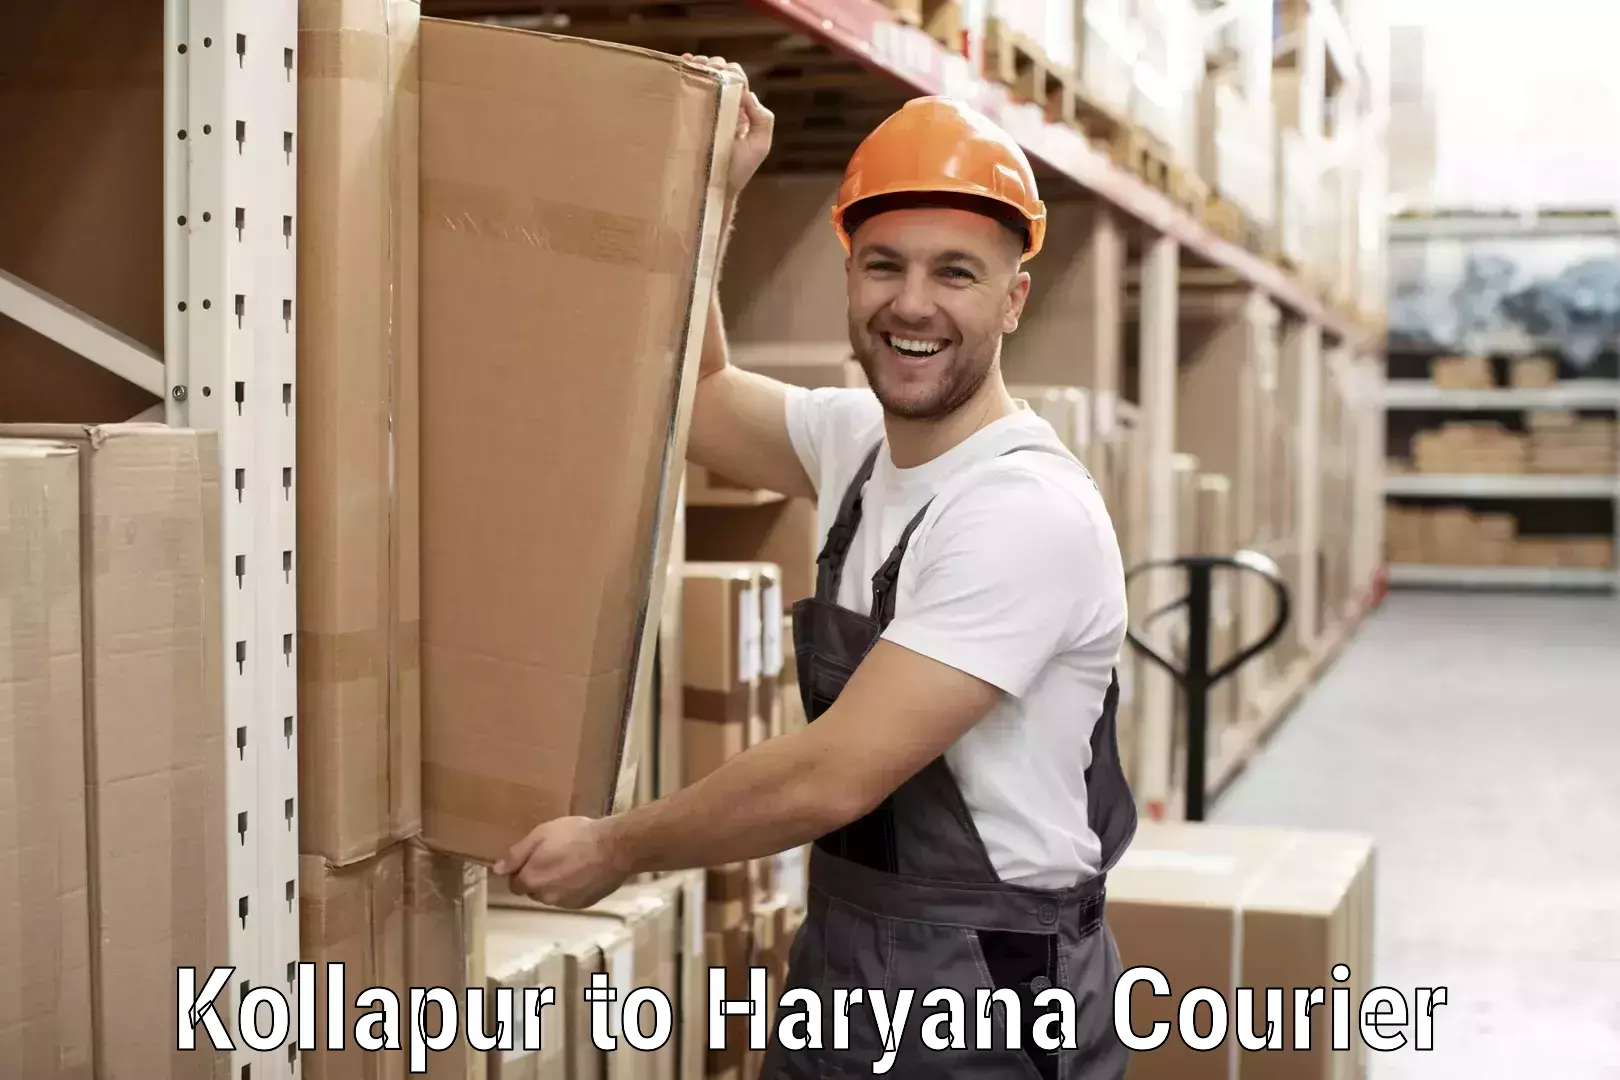 Reliable courier service Kollapur to NCR Haryana